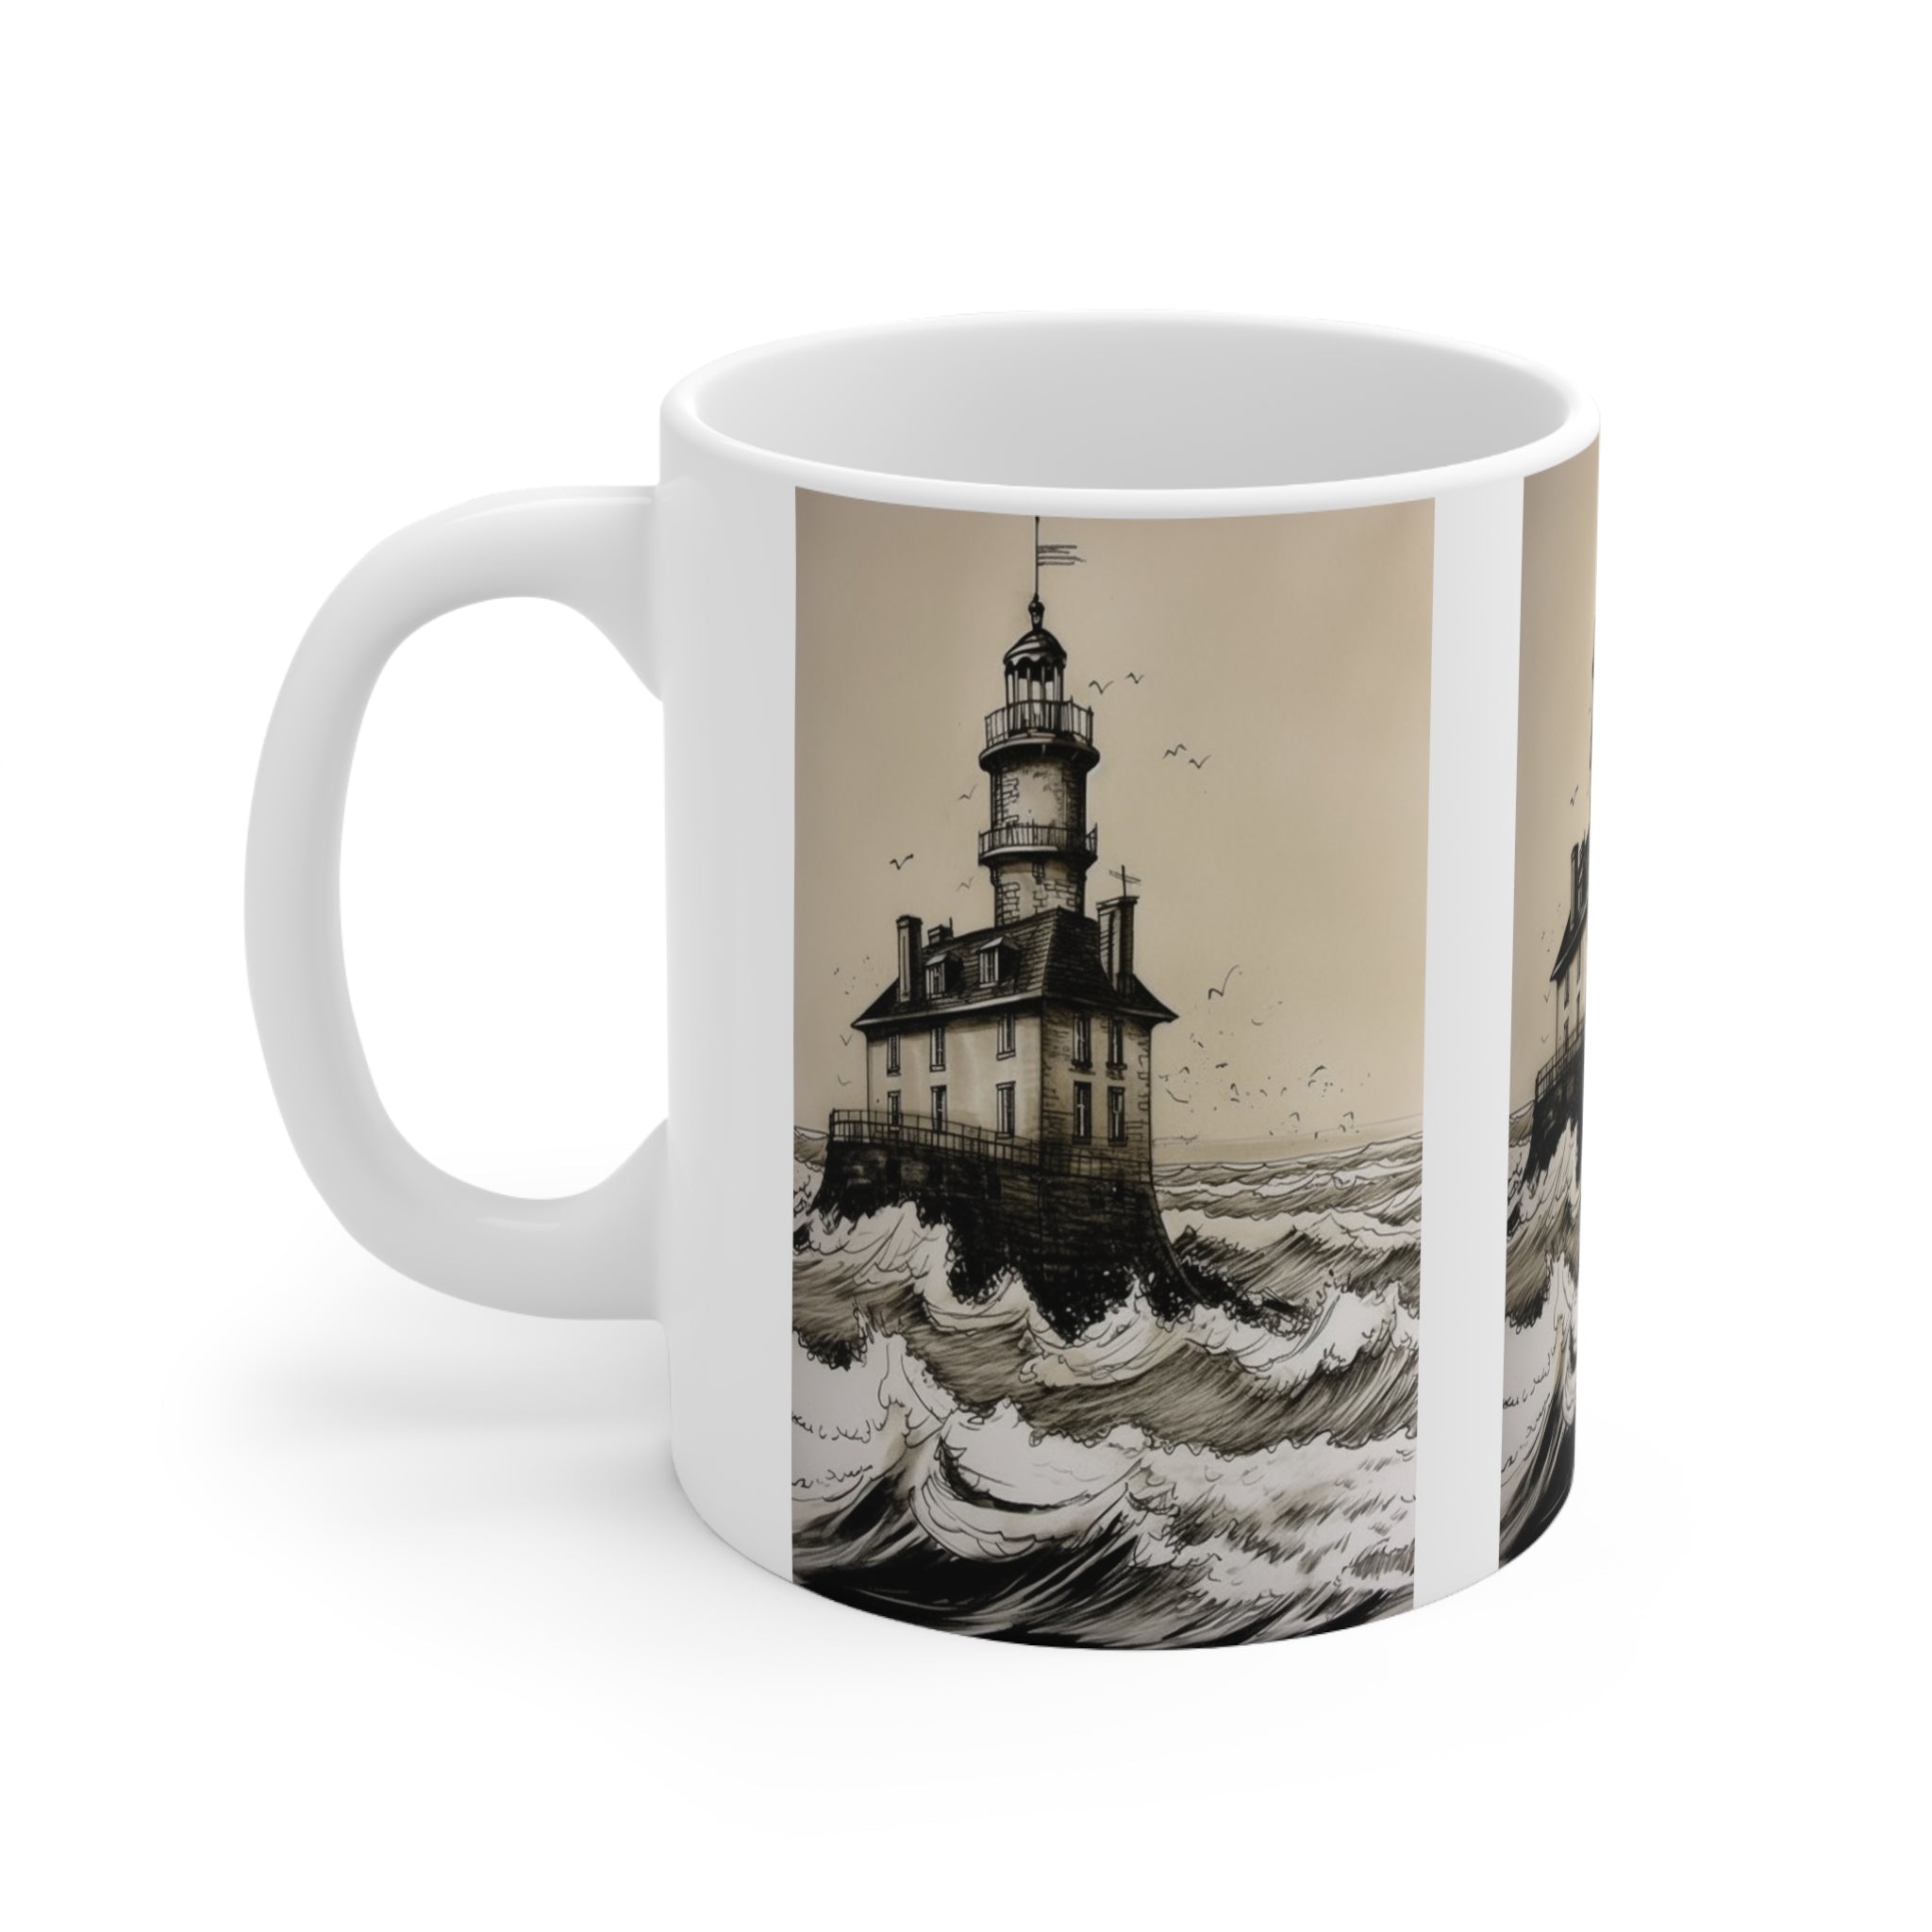 Combo "Lighthouse Against the White Surf of Waves" Ceramic Mug 11oz and Gratitude Journal - Coastal Charm & Nautical Elegance for Coffee Lovers Gift for Teachers Gift for Employees or Boss